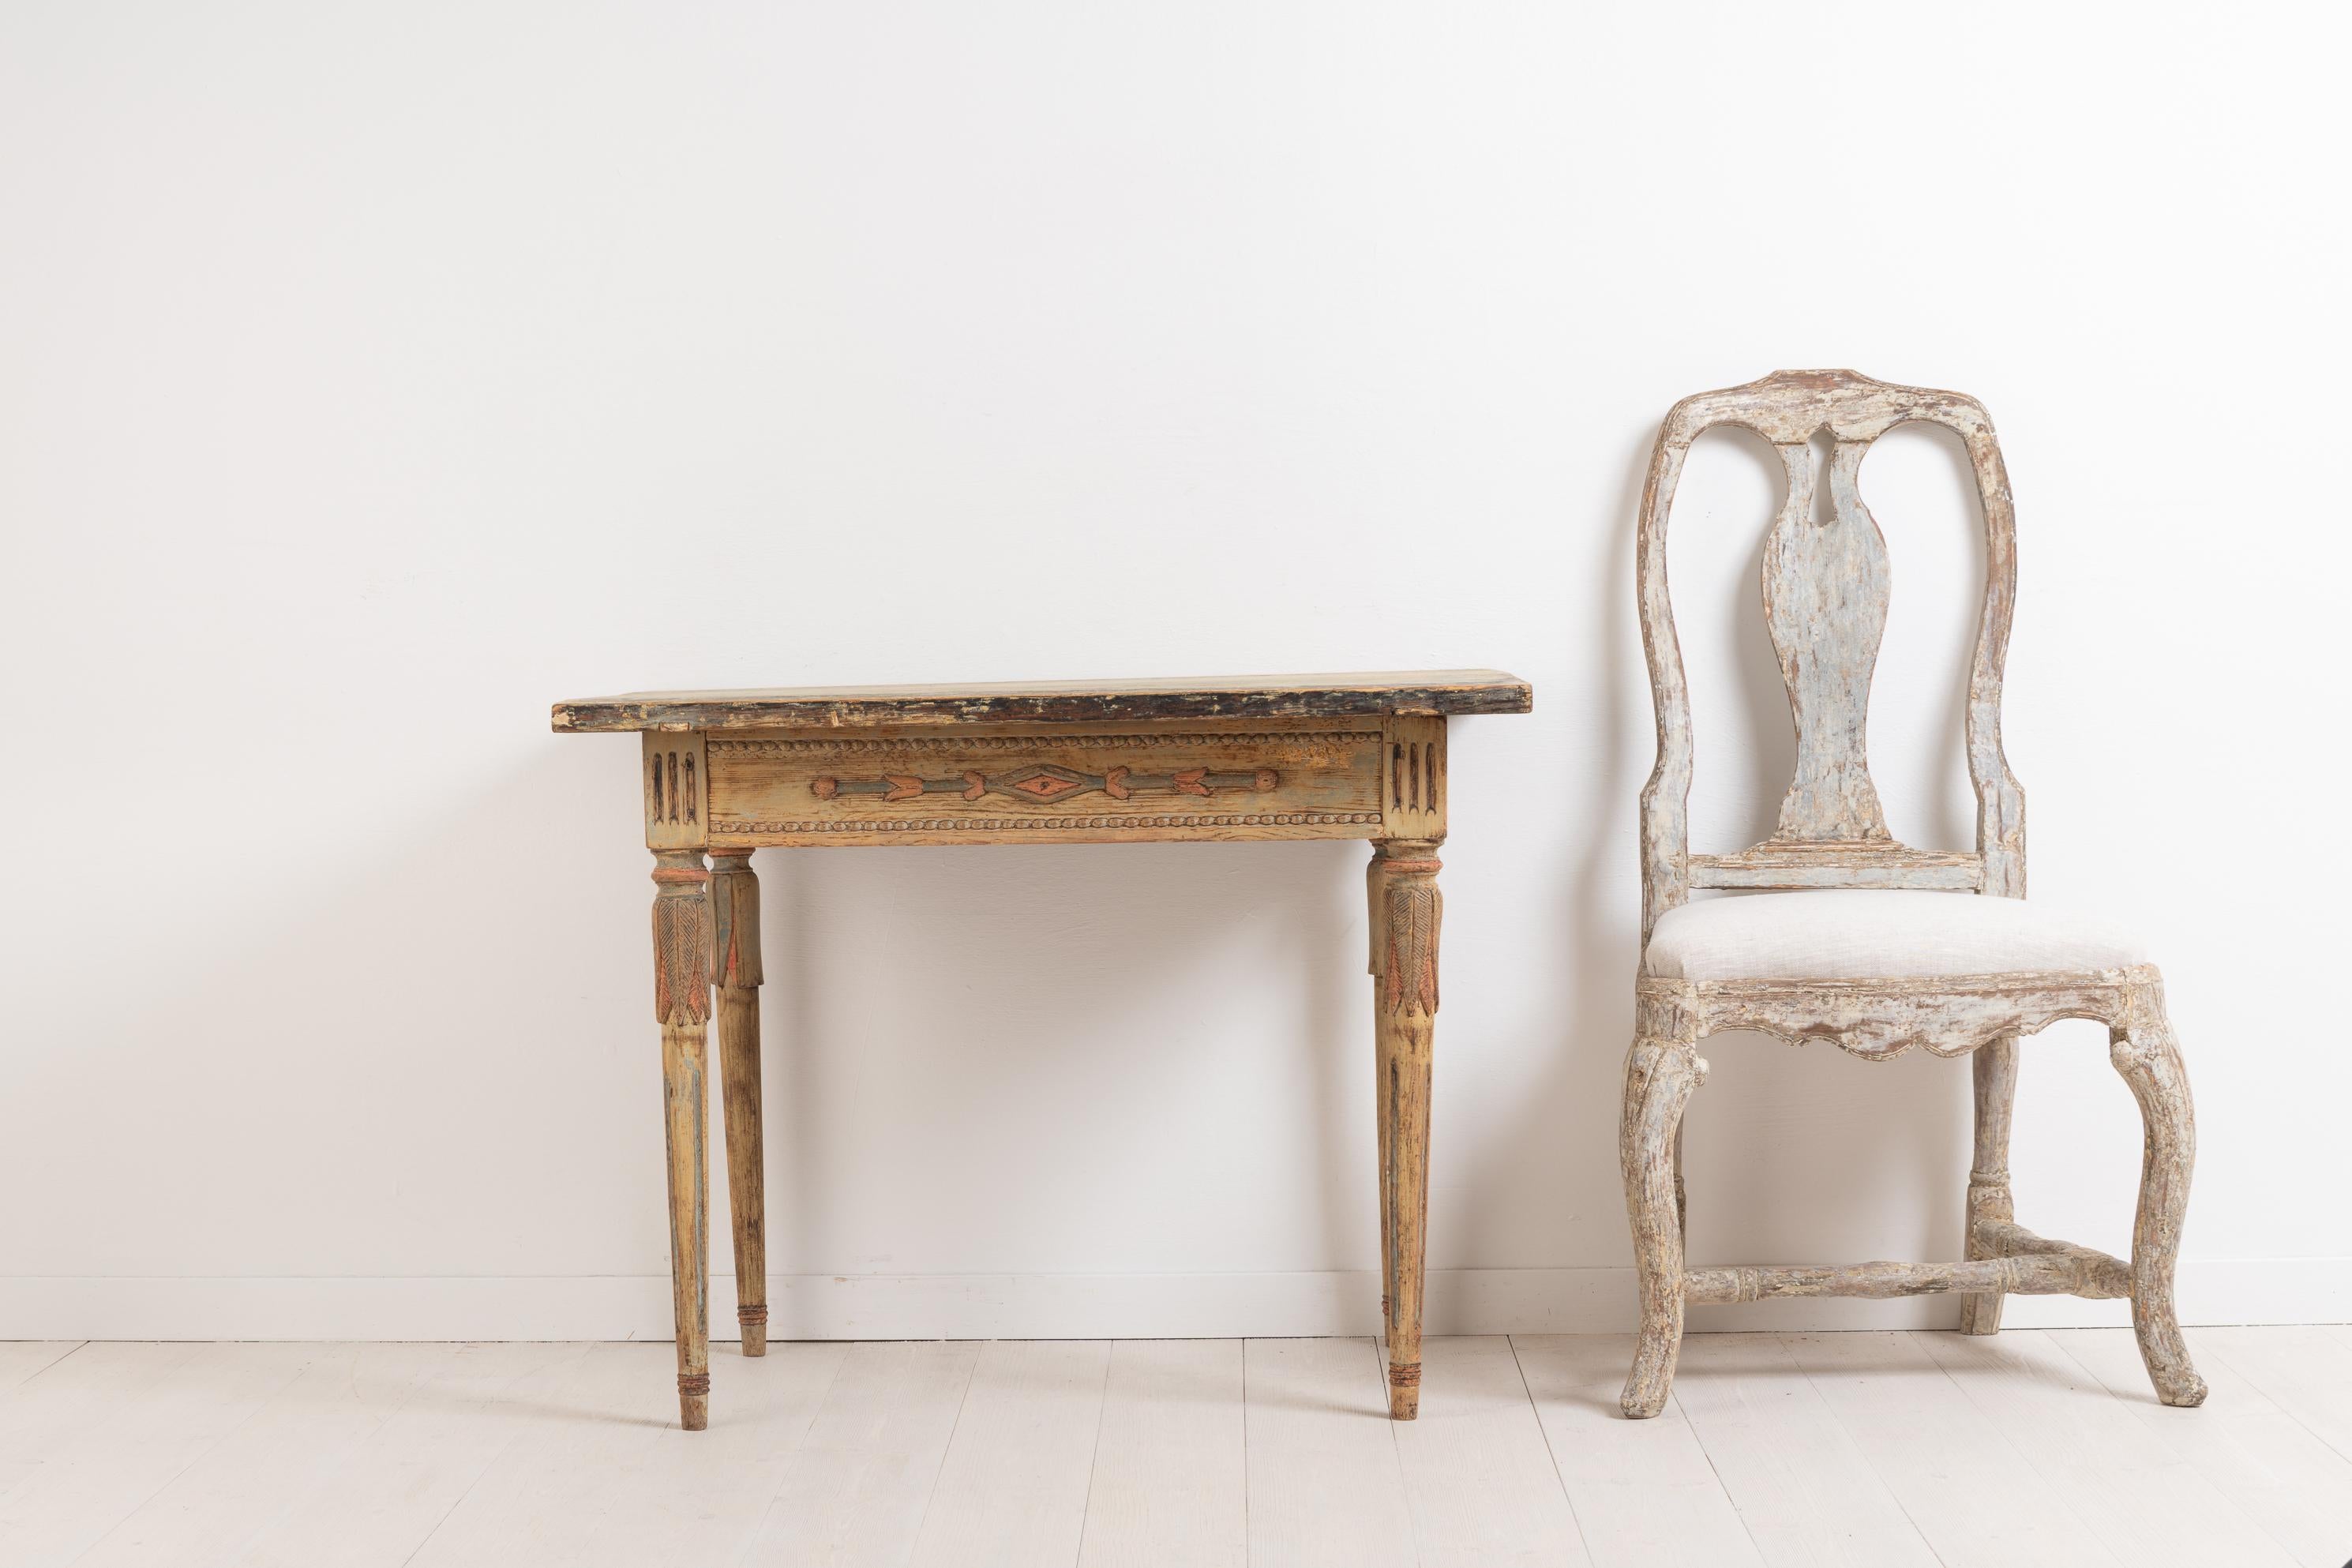 Swedish Provincial console table. The table has been scraped to the distressed original paint. It has a decorated rim in the shape of stylised flowers and Dual strands of pearls. The top of the legs are crafted to look as if they are growing out of